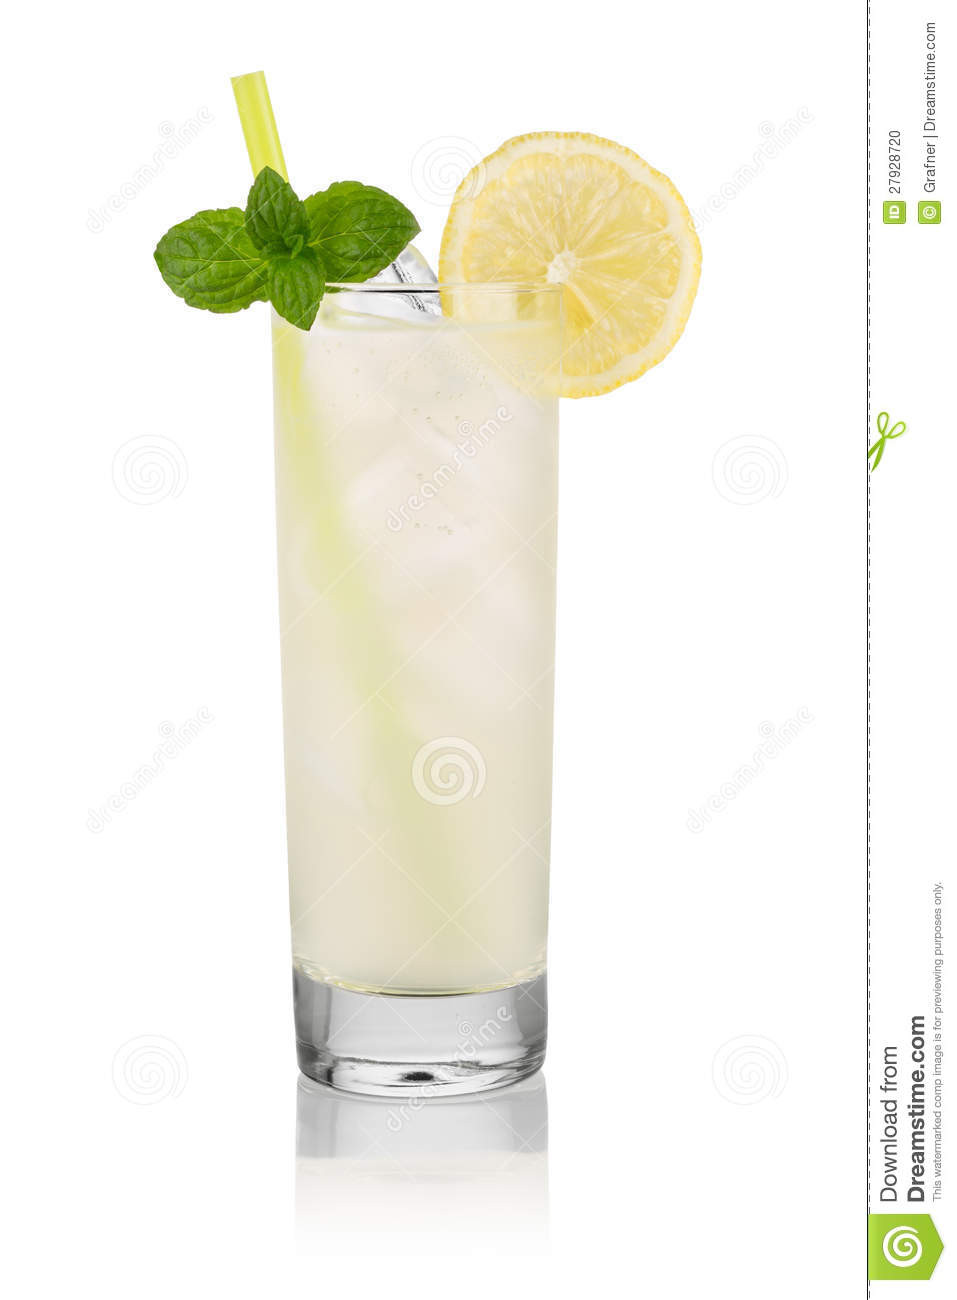 Best 21 Lemon Vodka Drinks - Best Recipes Ideas and Collections